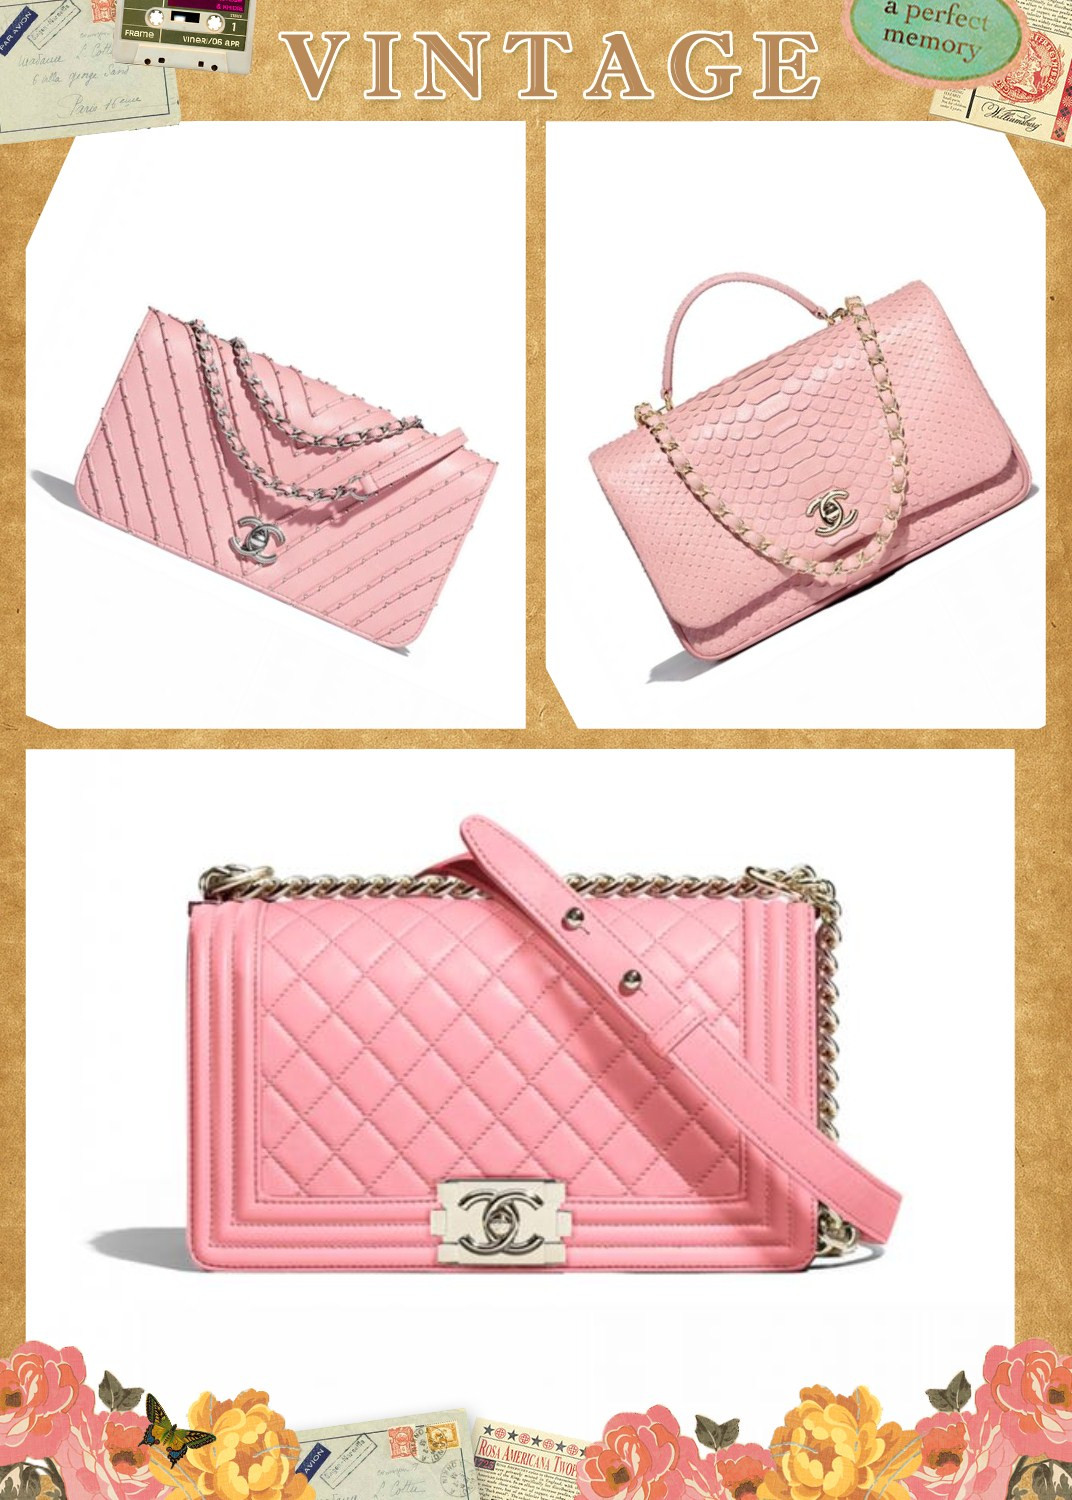 Chanel Pink Bag Wholesale7 Blog Latest Fashion News And Trends